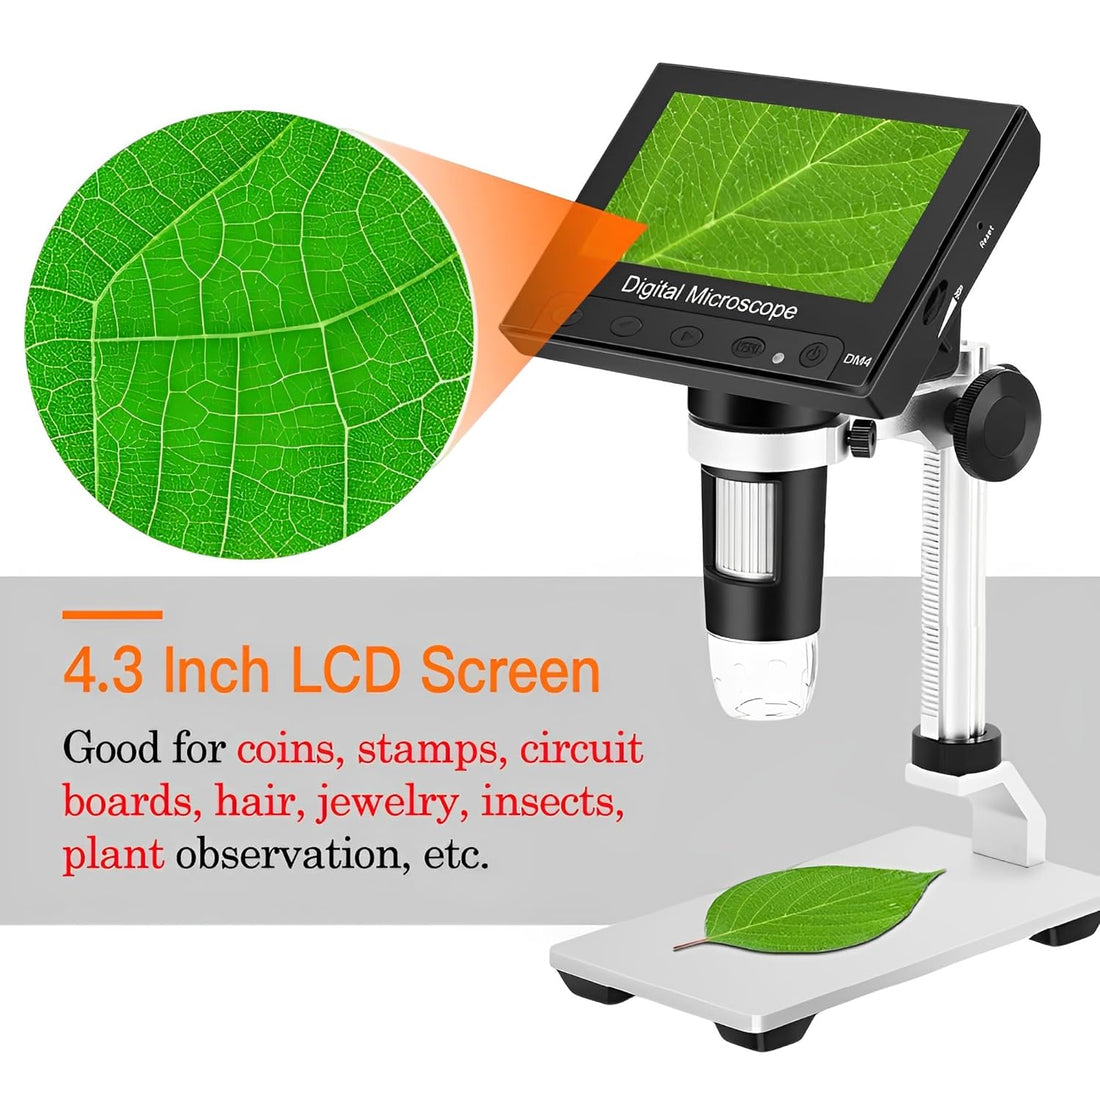 Ninyoon DM4 Digital Microscope with 4.3inch LCD Screen, 50-1000X Coin Microscope for Error Coins, USB Magnifier Micro Scope with High Stand 8 Adjustable LED Lights for Windows PC View